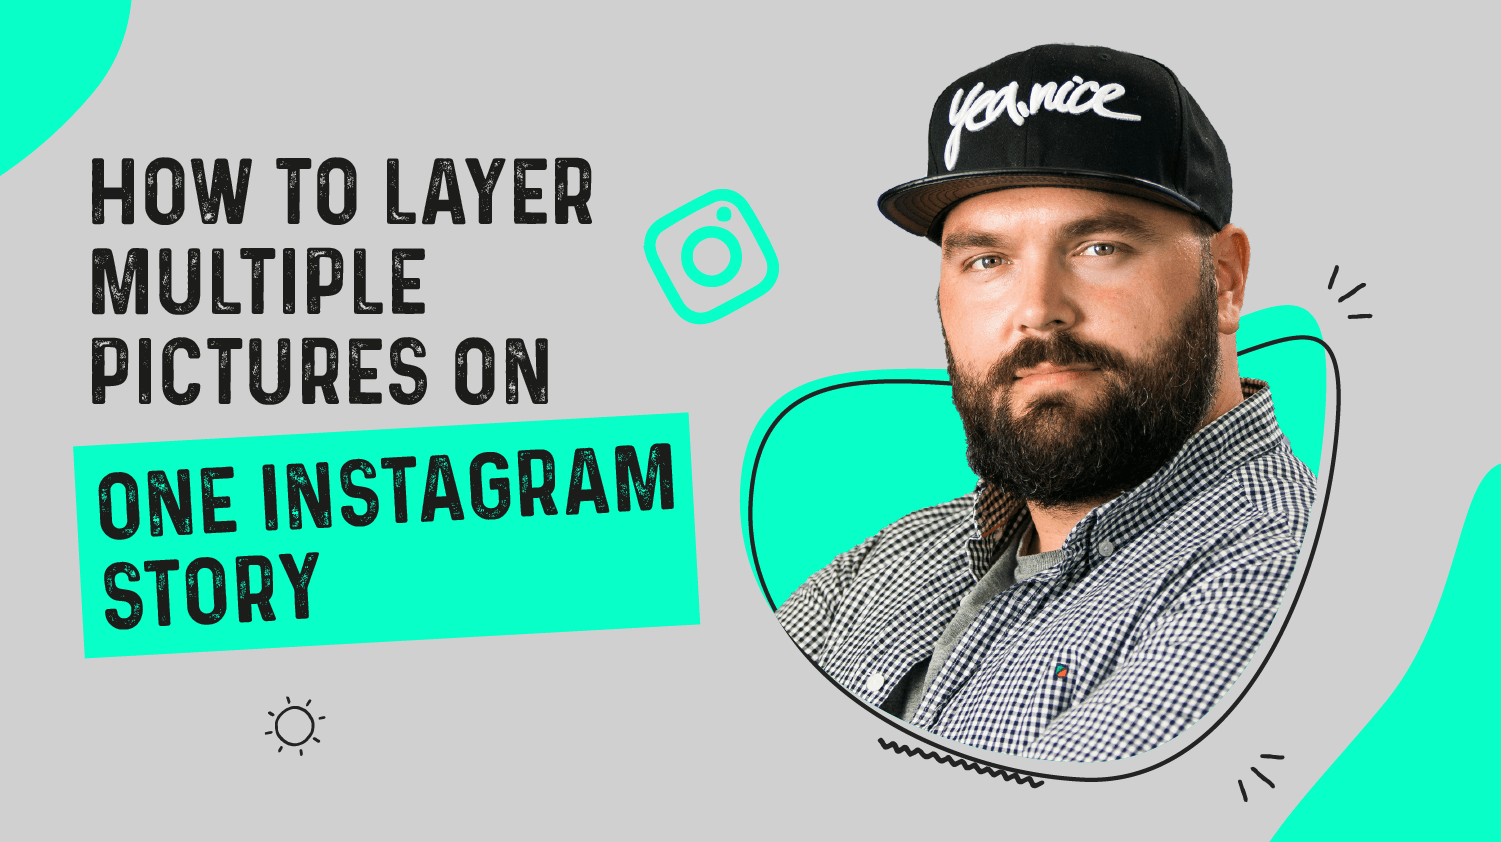 How to Layer Multiple Pictures on One Instagram Story